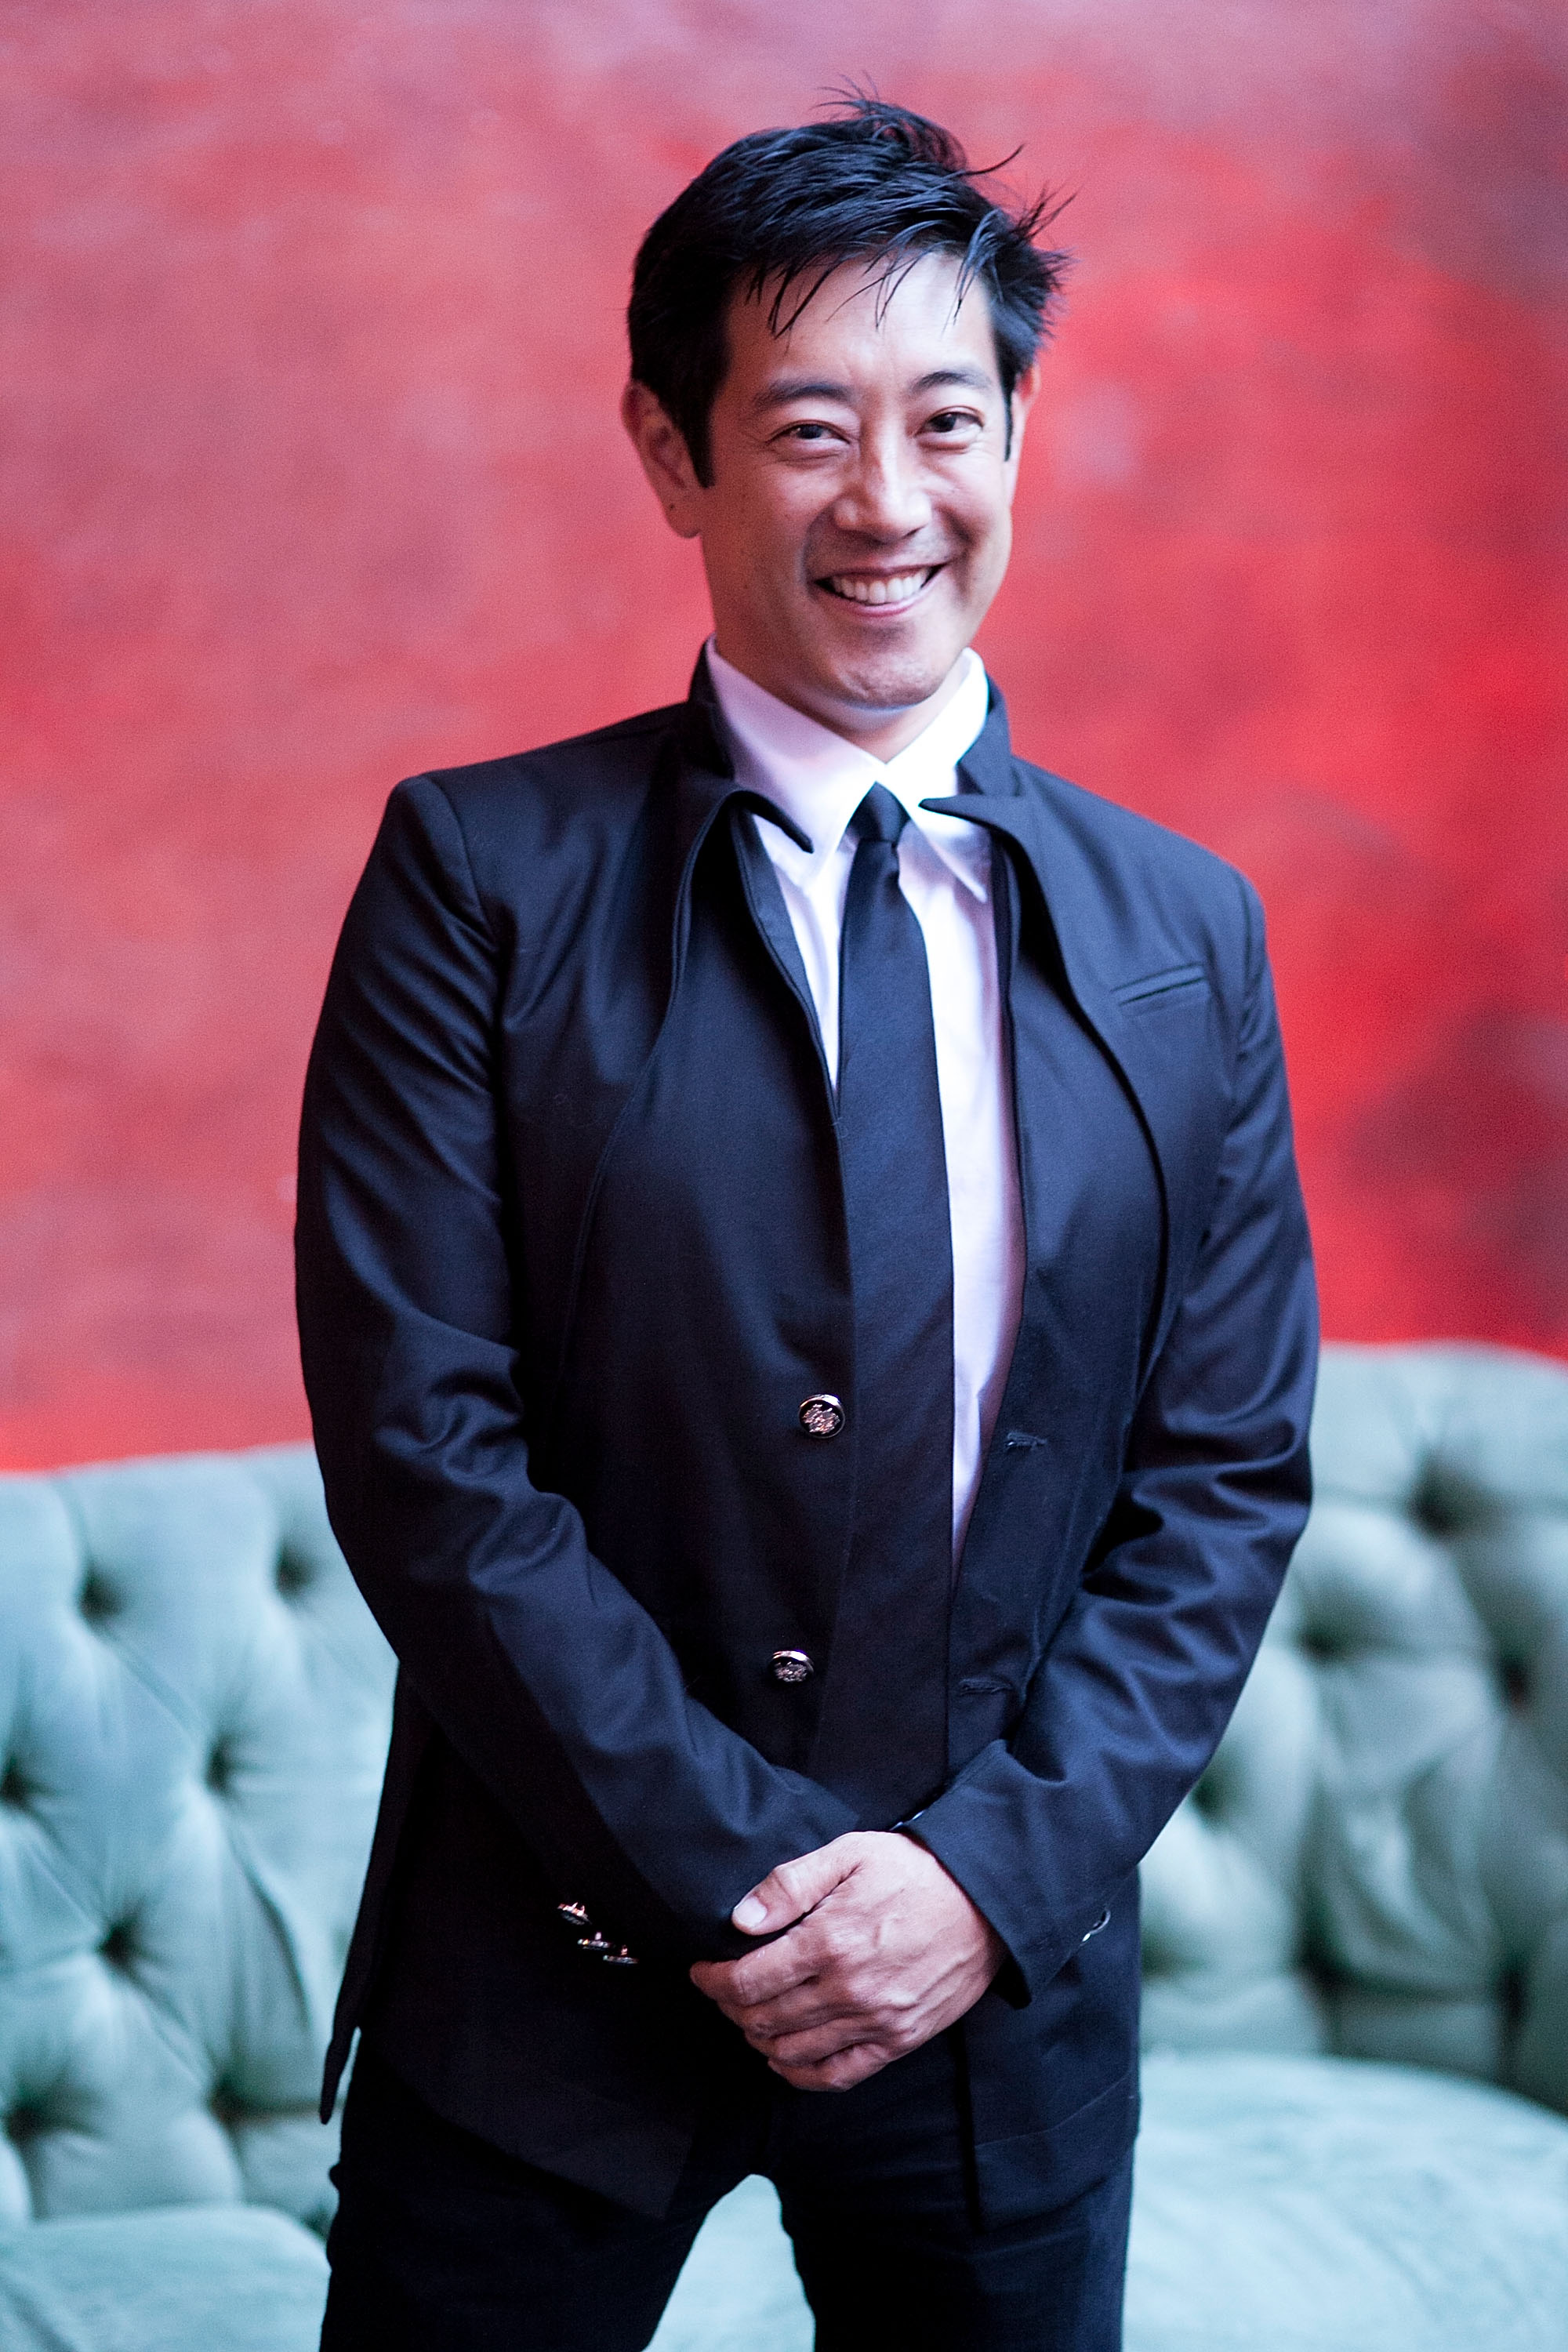 Grant Imahara attends The Geekie Awards 2014 at Avalon on August 17, 2014 in Hollywood, California.